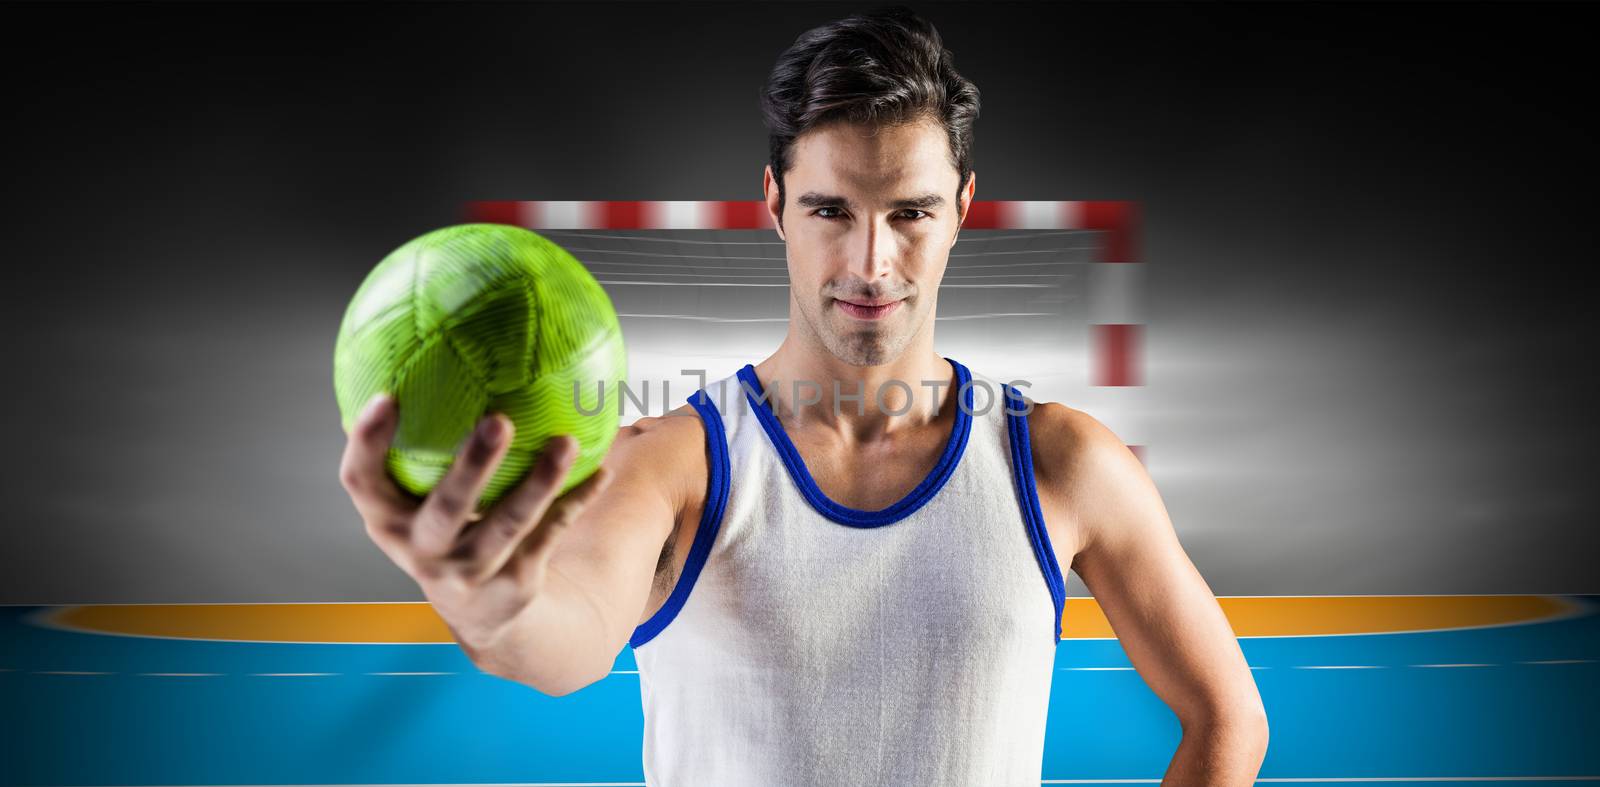 Portrait of happy male athlete holding a ball against handball field indoor 